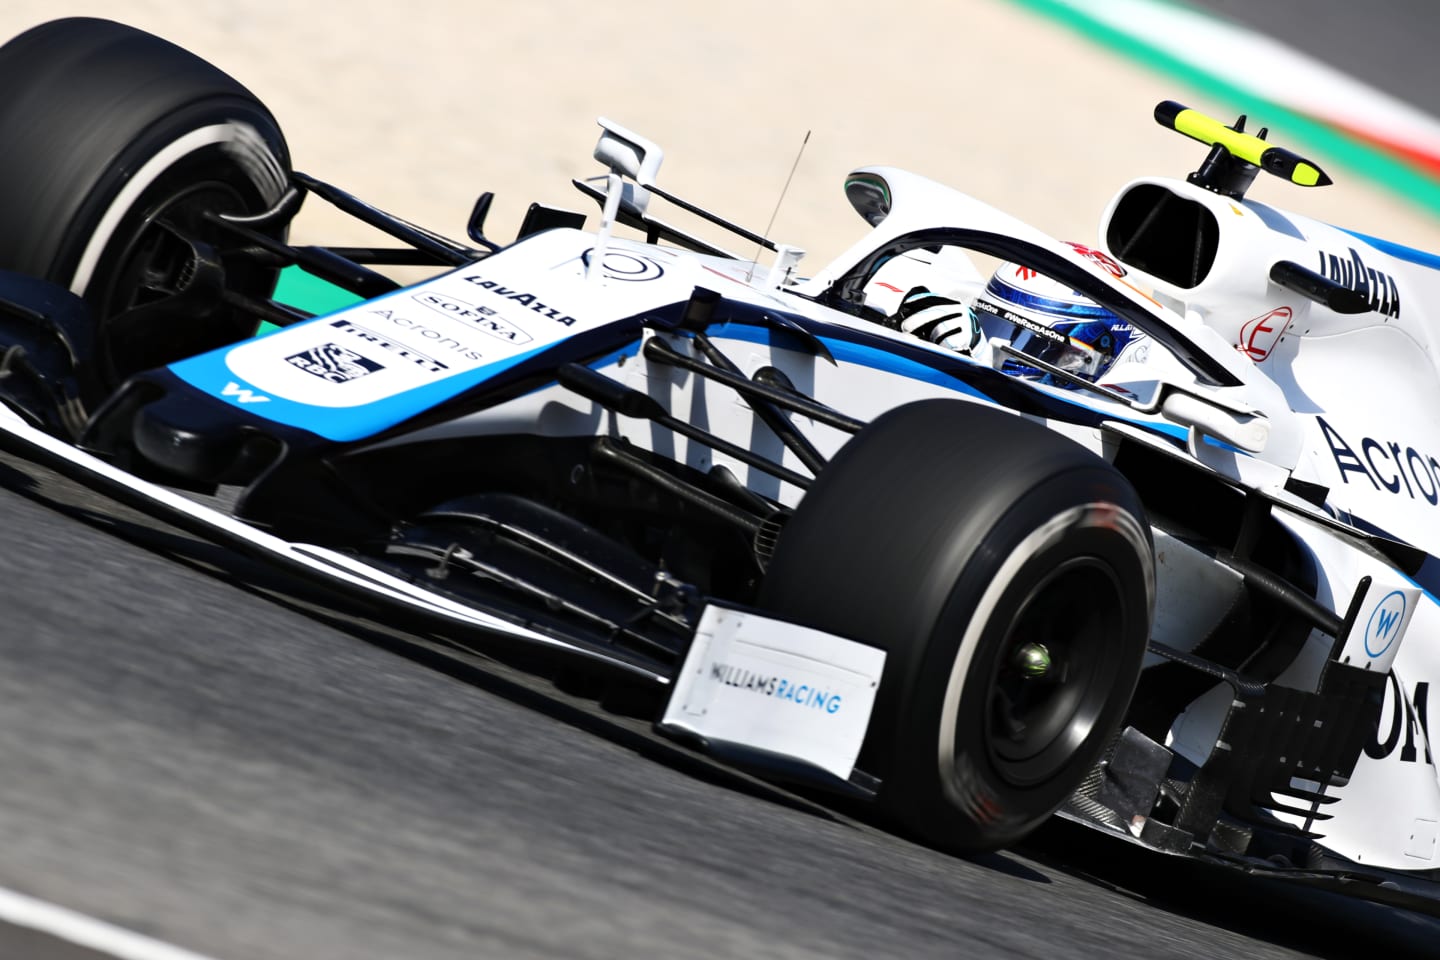 SCARPERIA, ITALY - SEPTEMBER 11: Nicholas Latifi of Canada driving the (6) Williams Racing FW43 Mercedes on track during practice ahead of the F1 Grand Prix of Tuscany at Mugello Circuit on September 11, 2020 in Scarperia, Italy. (Photo by Mark Thompson/Getty Images)